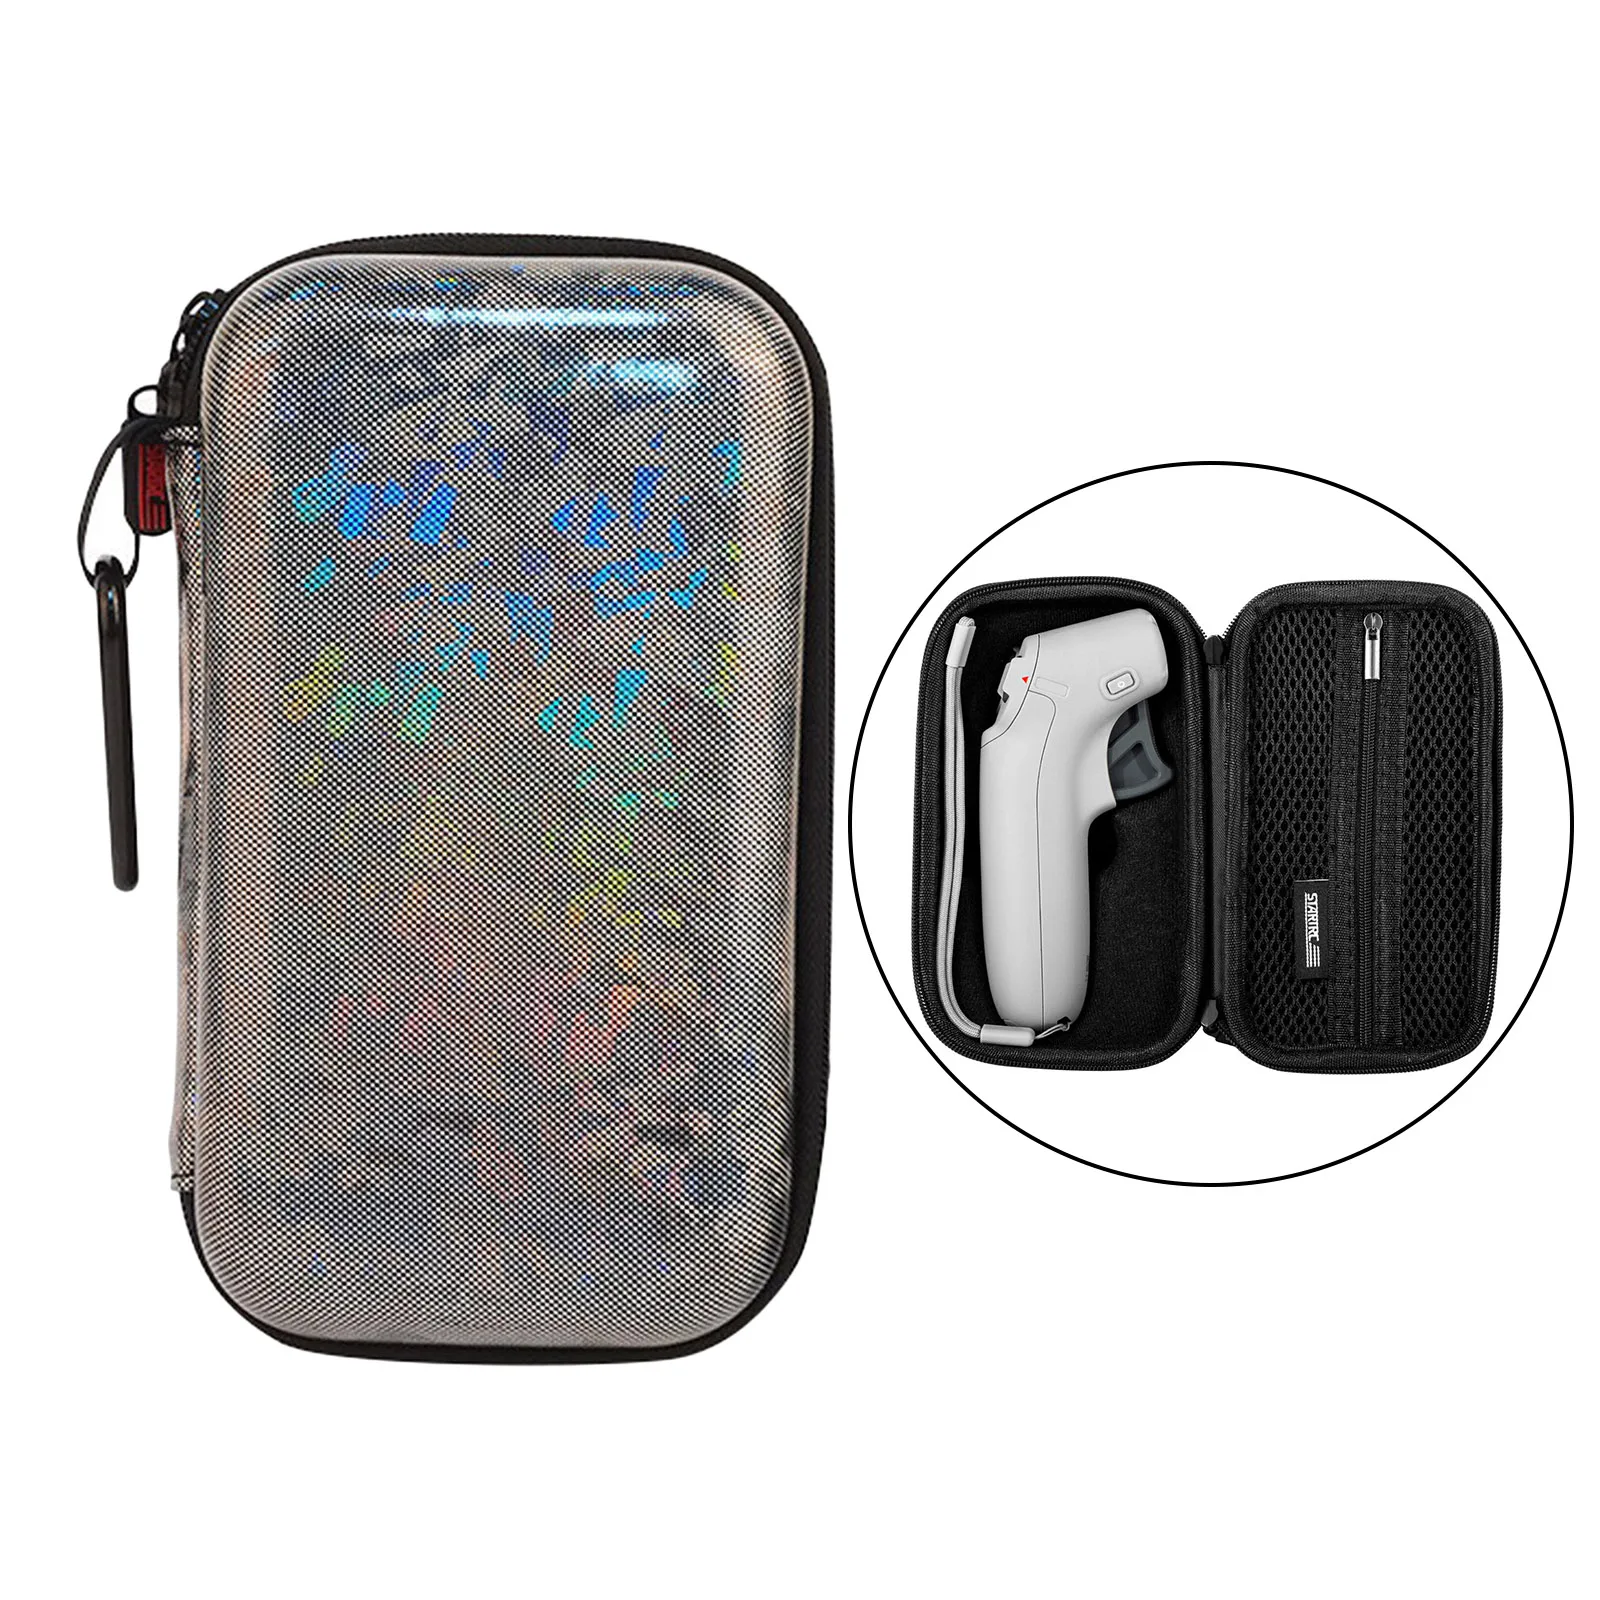 Carrying Case for DJI FPV Portable Storage Bag Carrying Case Mini Drone/Transmitter and Accessories (for Drone)